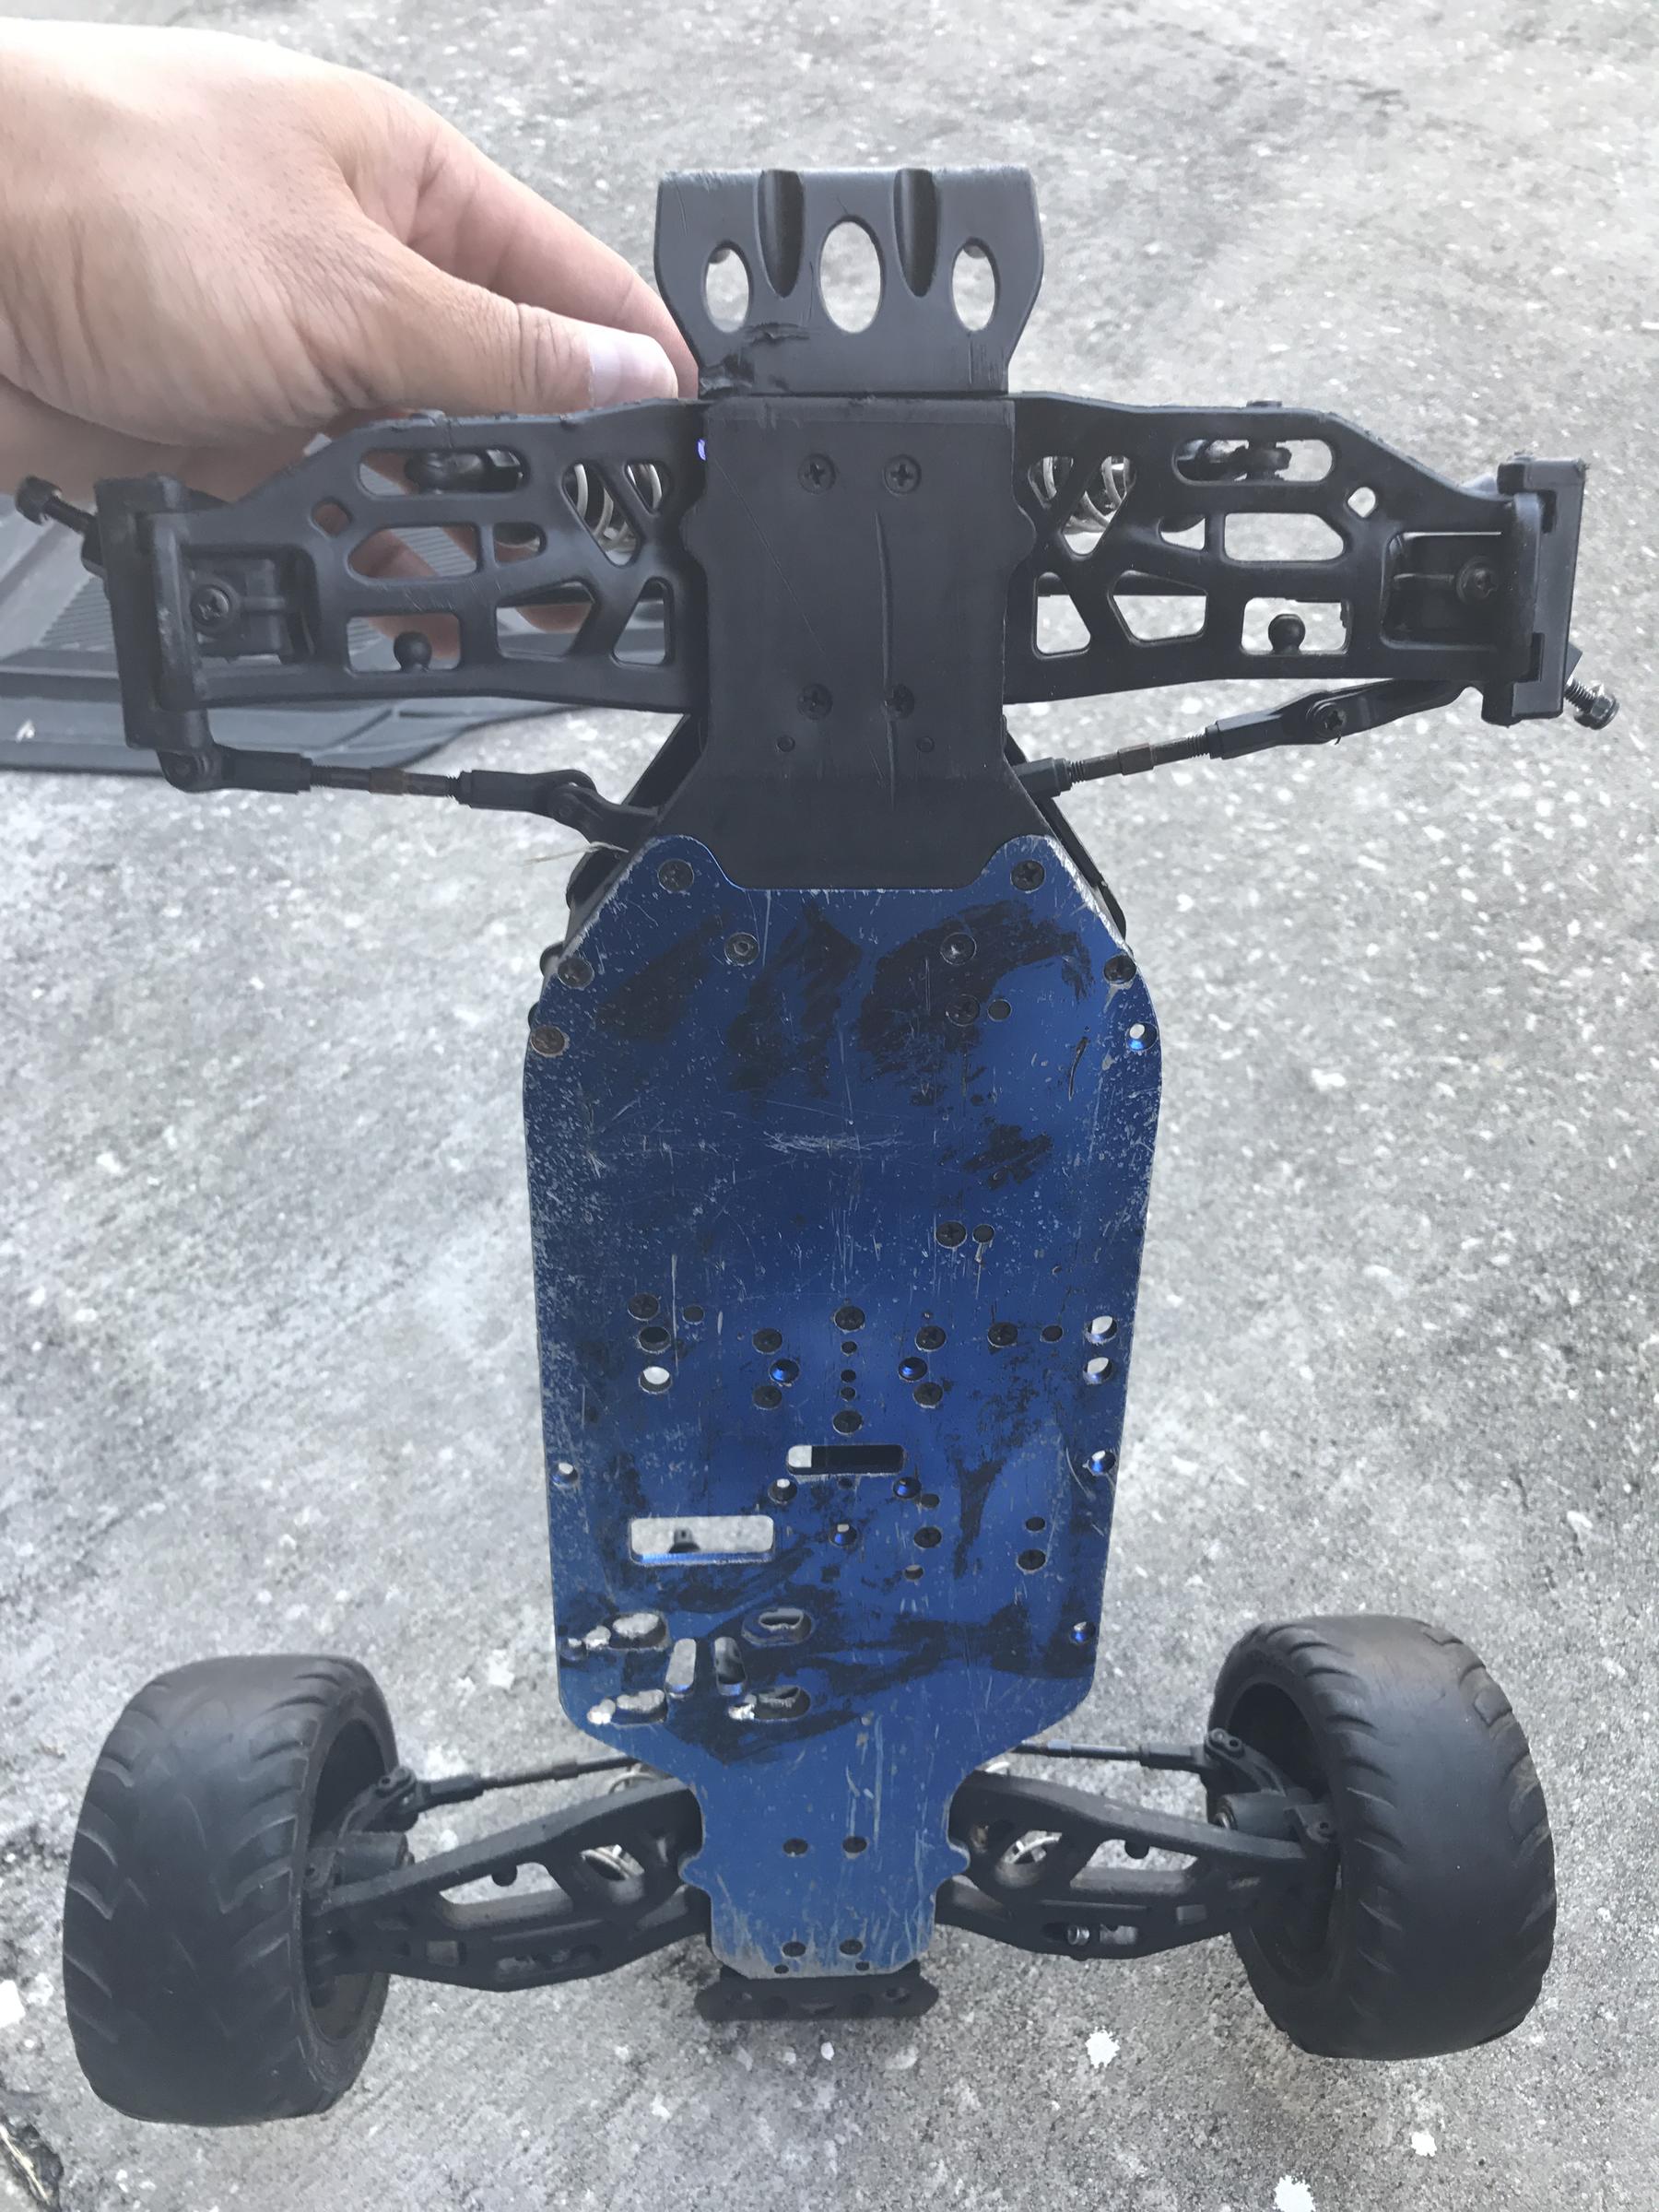 Need help identifying chassis - R/C Tech Forums